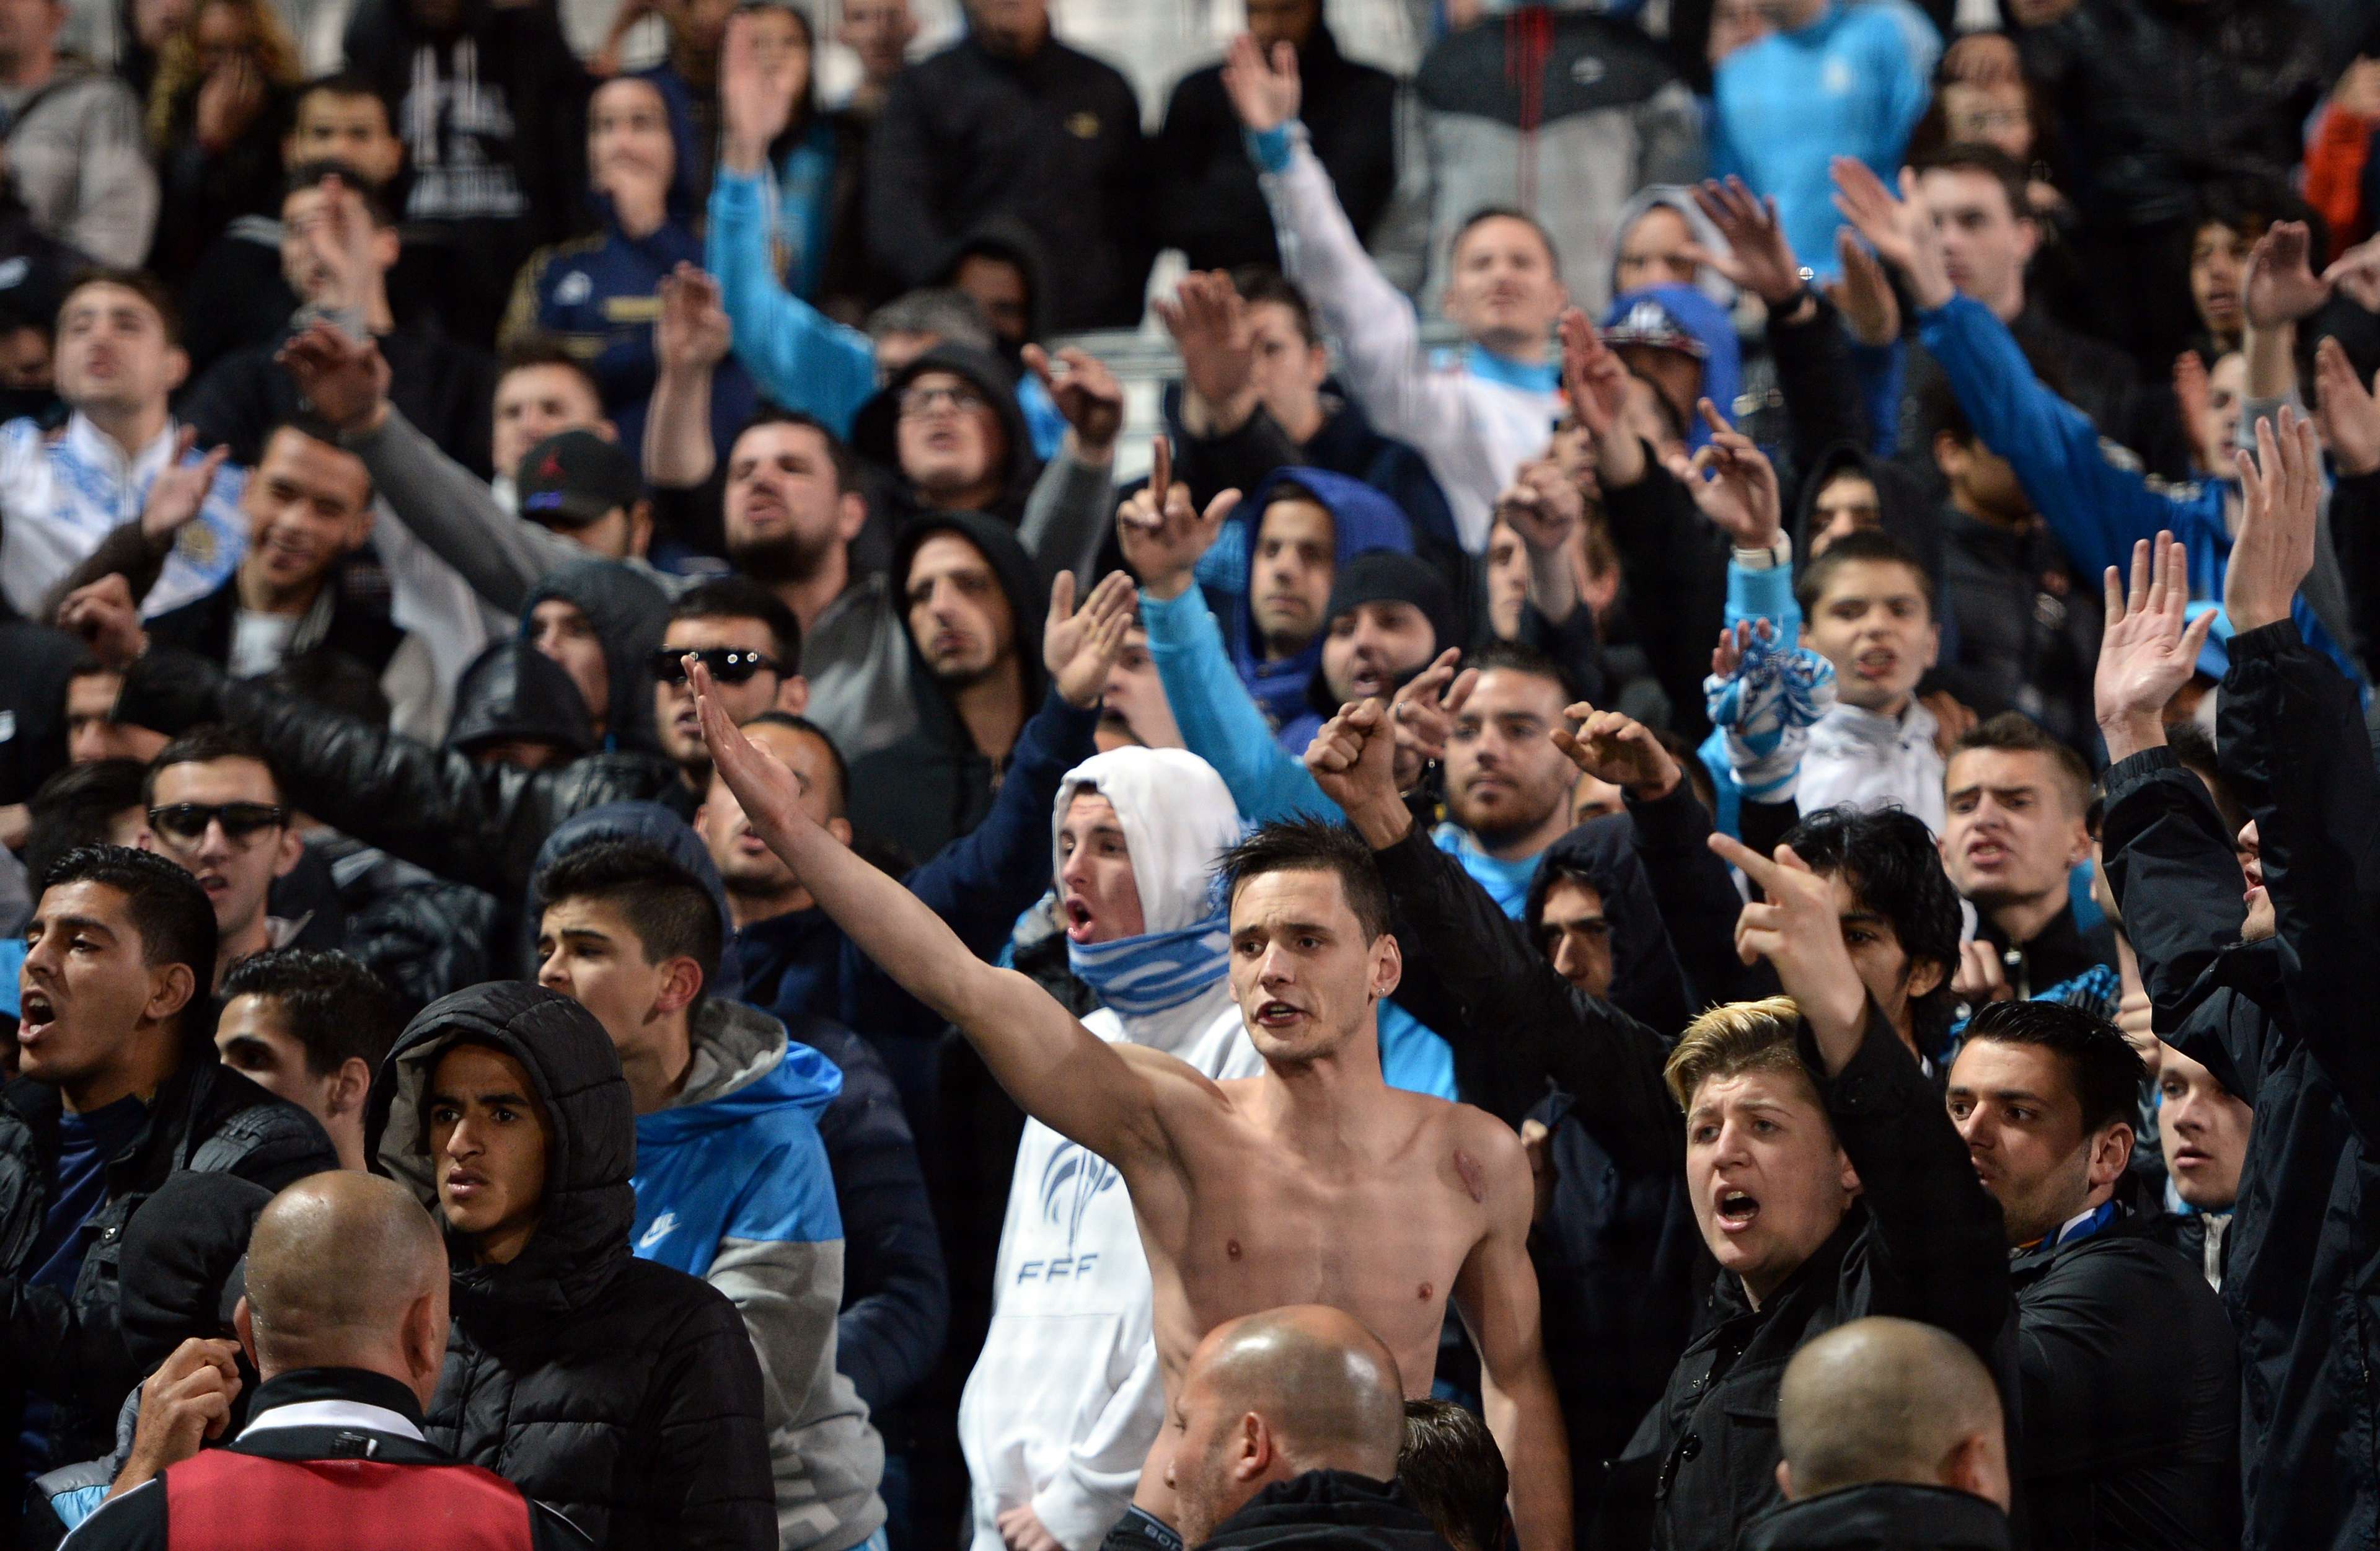 Marseille supporters